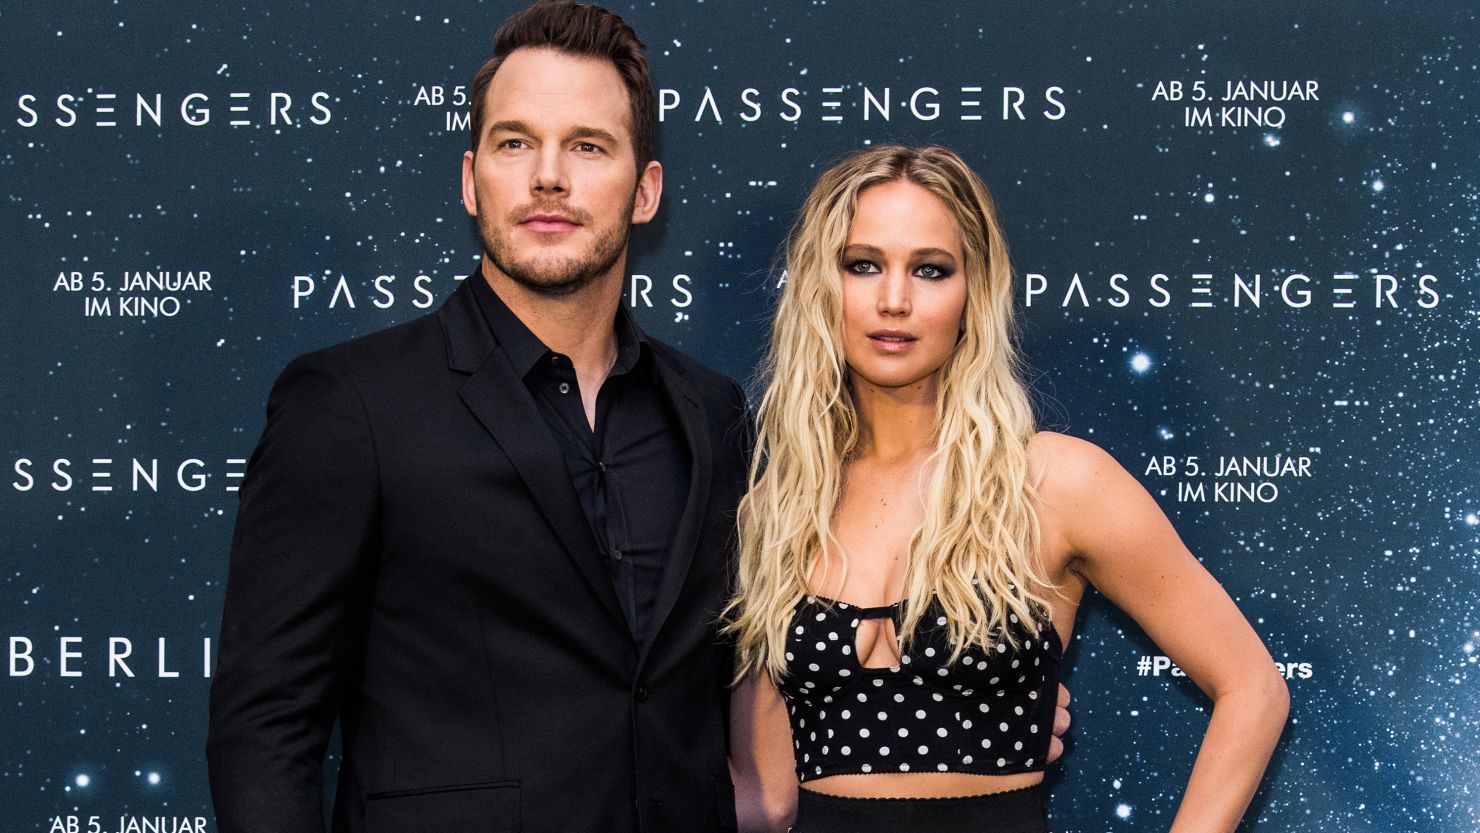 Chris Pratt and Jennifer Lawrence attend an event for their film "Passengers" Friday in Berlin, Germany